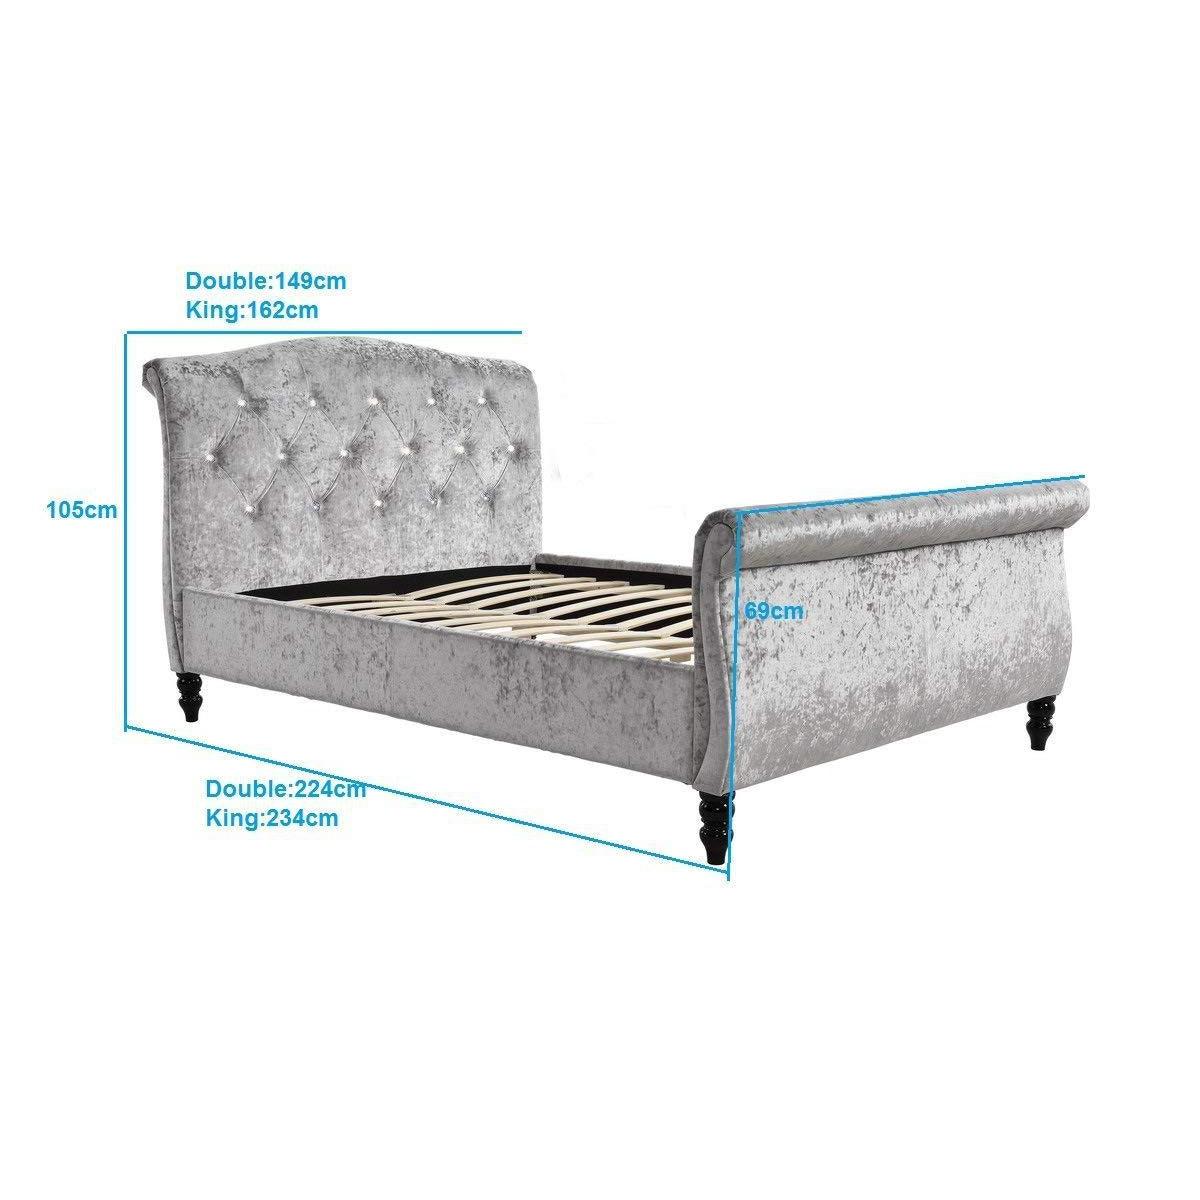 MEISSA Crushed Velvet Upholstered Sleigh Bed with Diamante Headboard, Silver